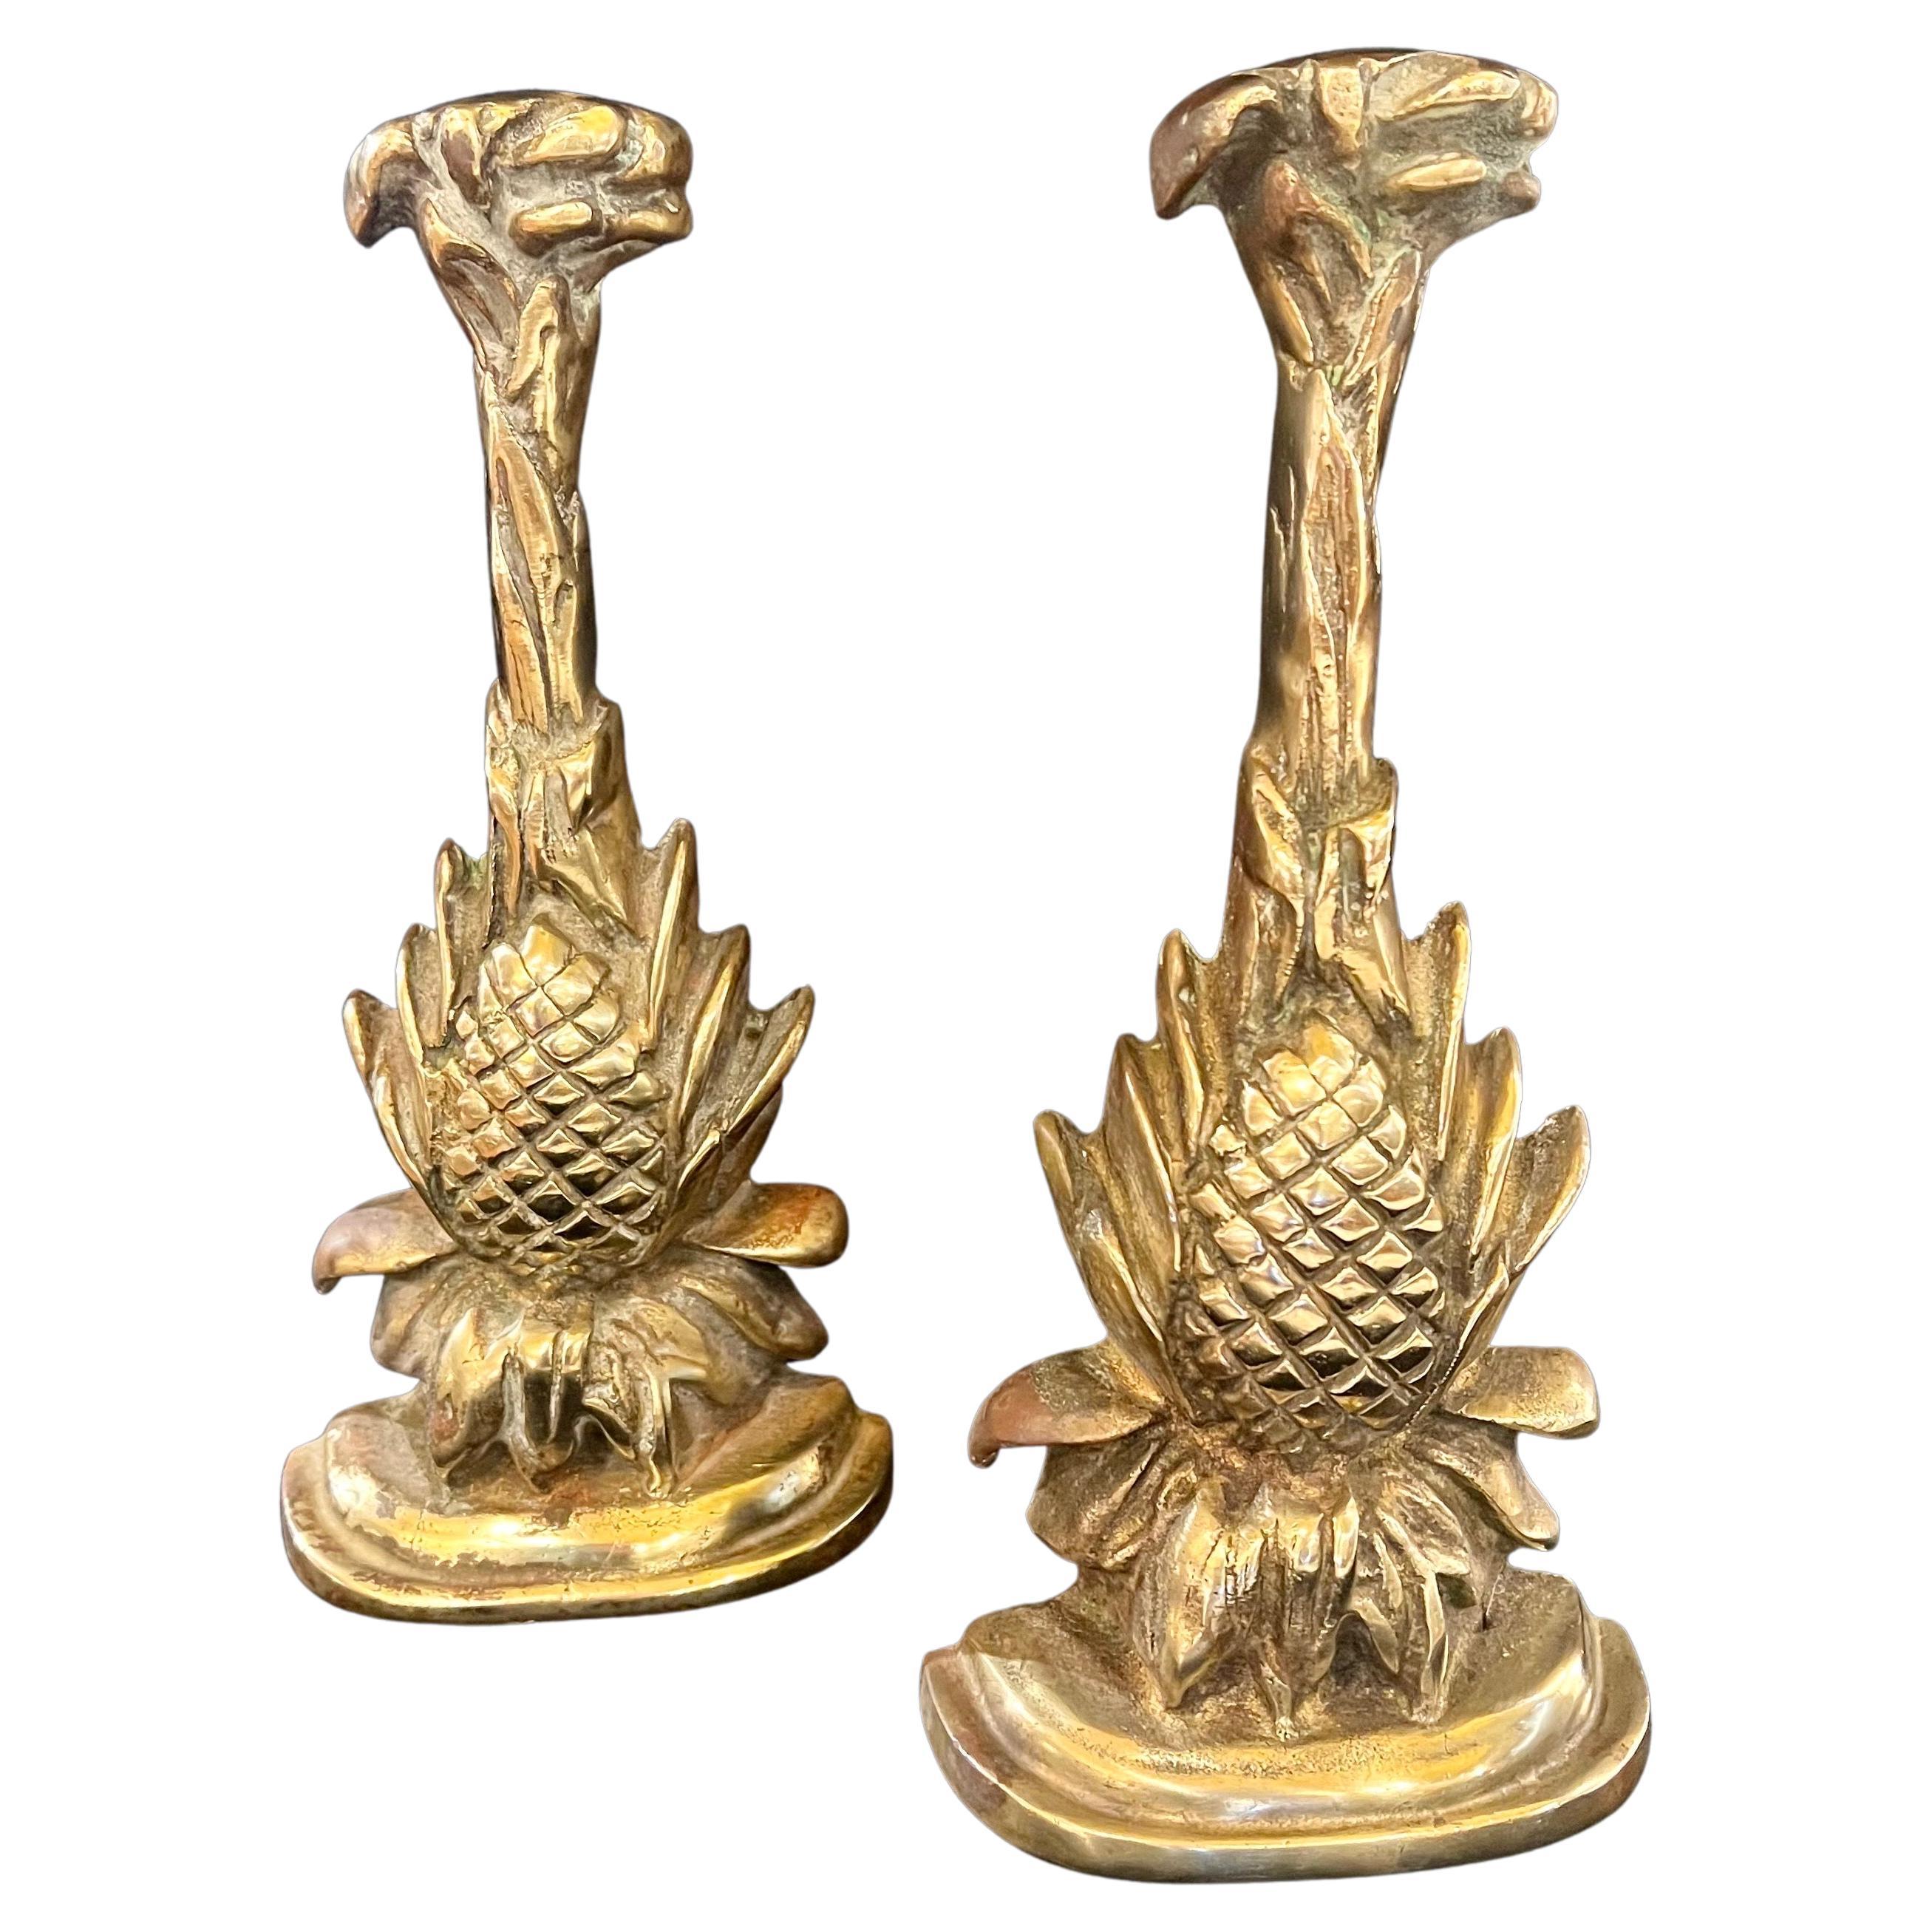 1970s Solid Cast Patinated Brass Pineapple Bookends Hollywood Regency For Sale